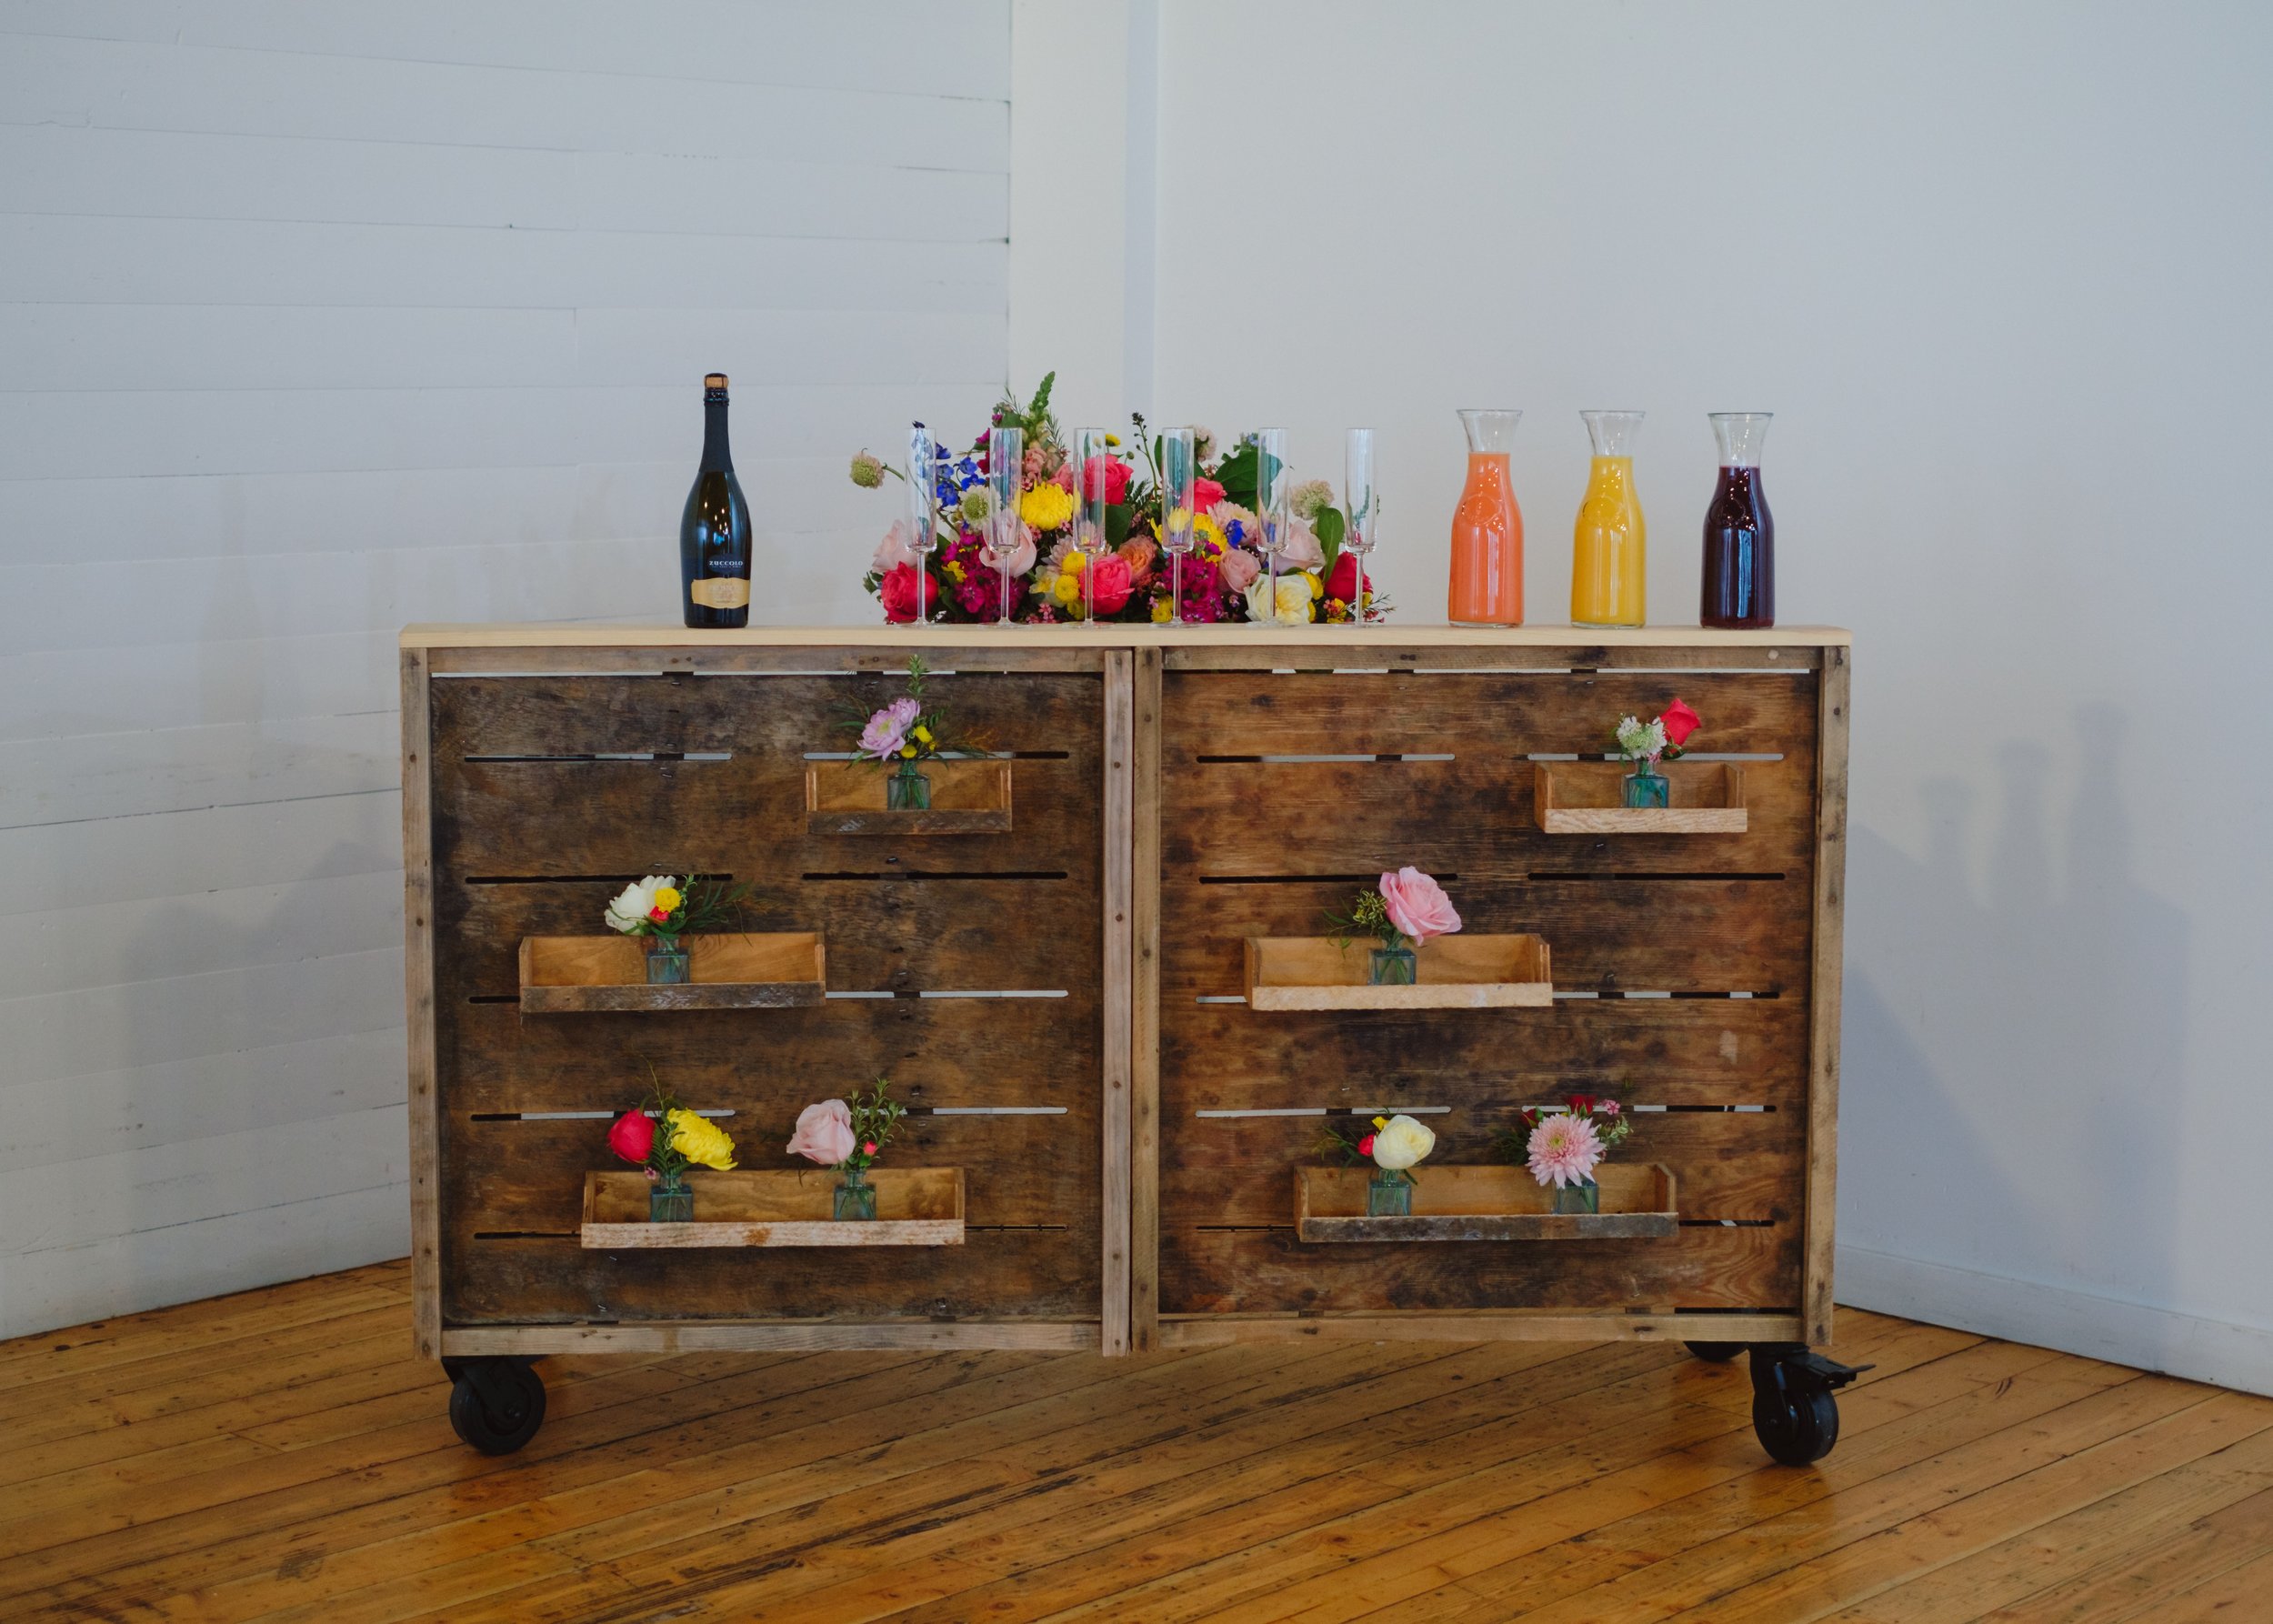  A wood slat style bar set with carafes of juice, champagne glasses, and a bottle of sparkling wine. 